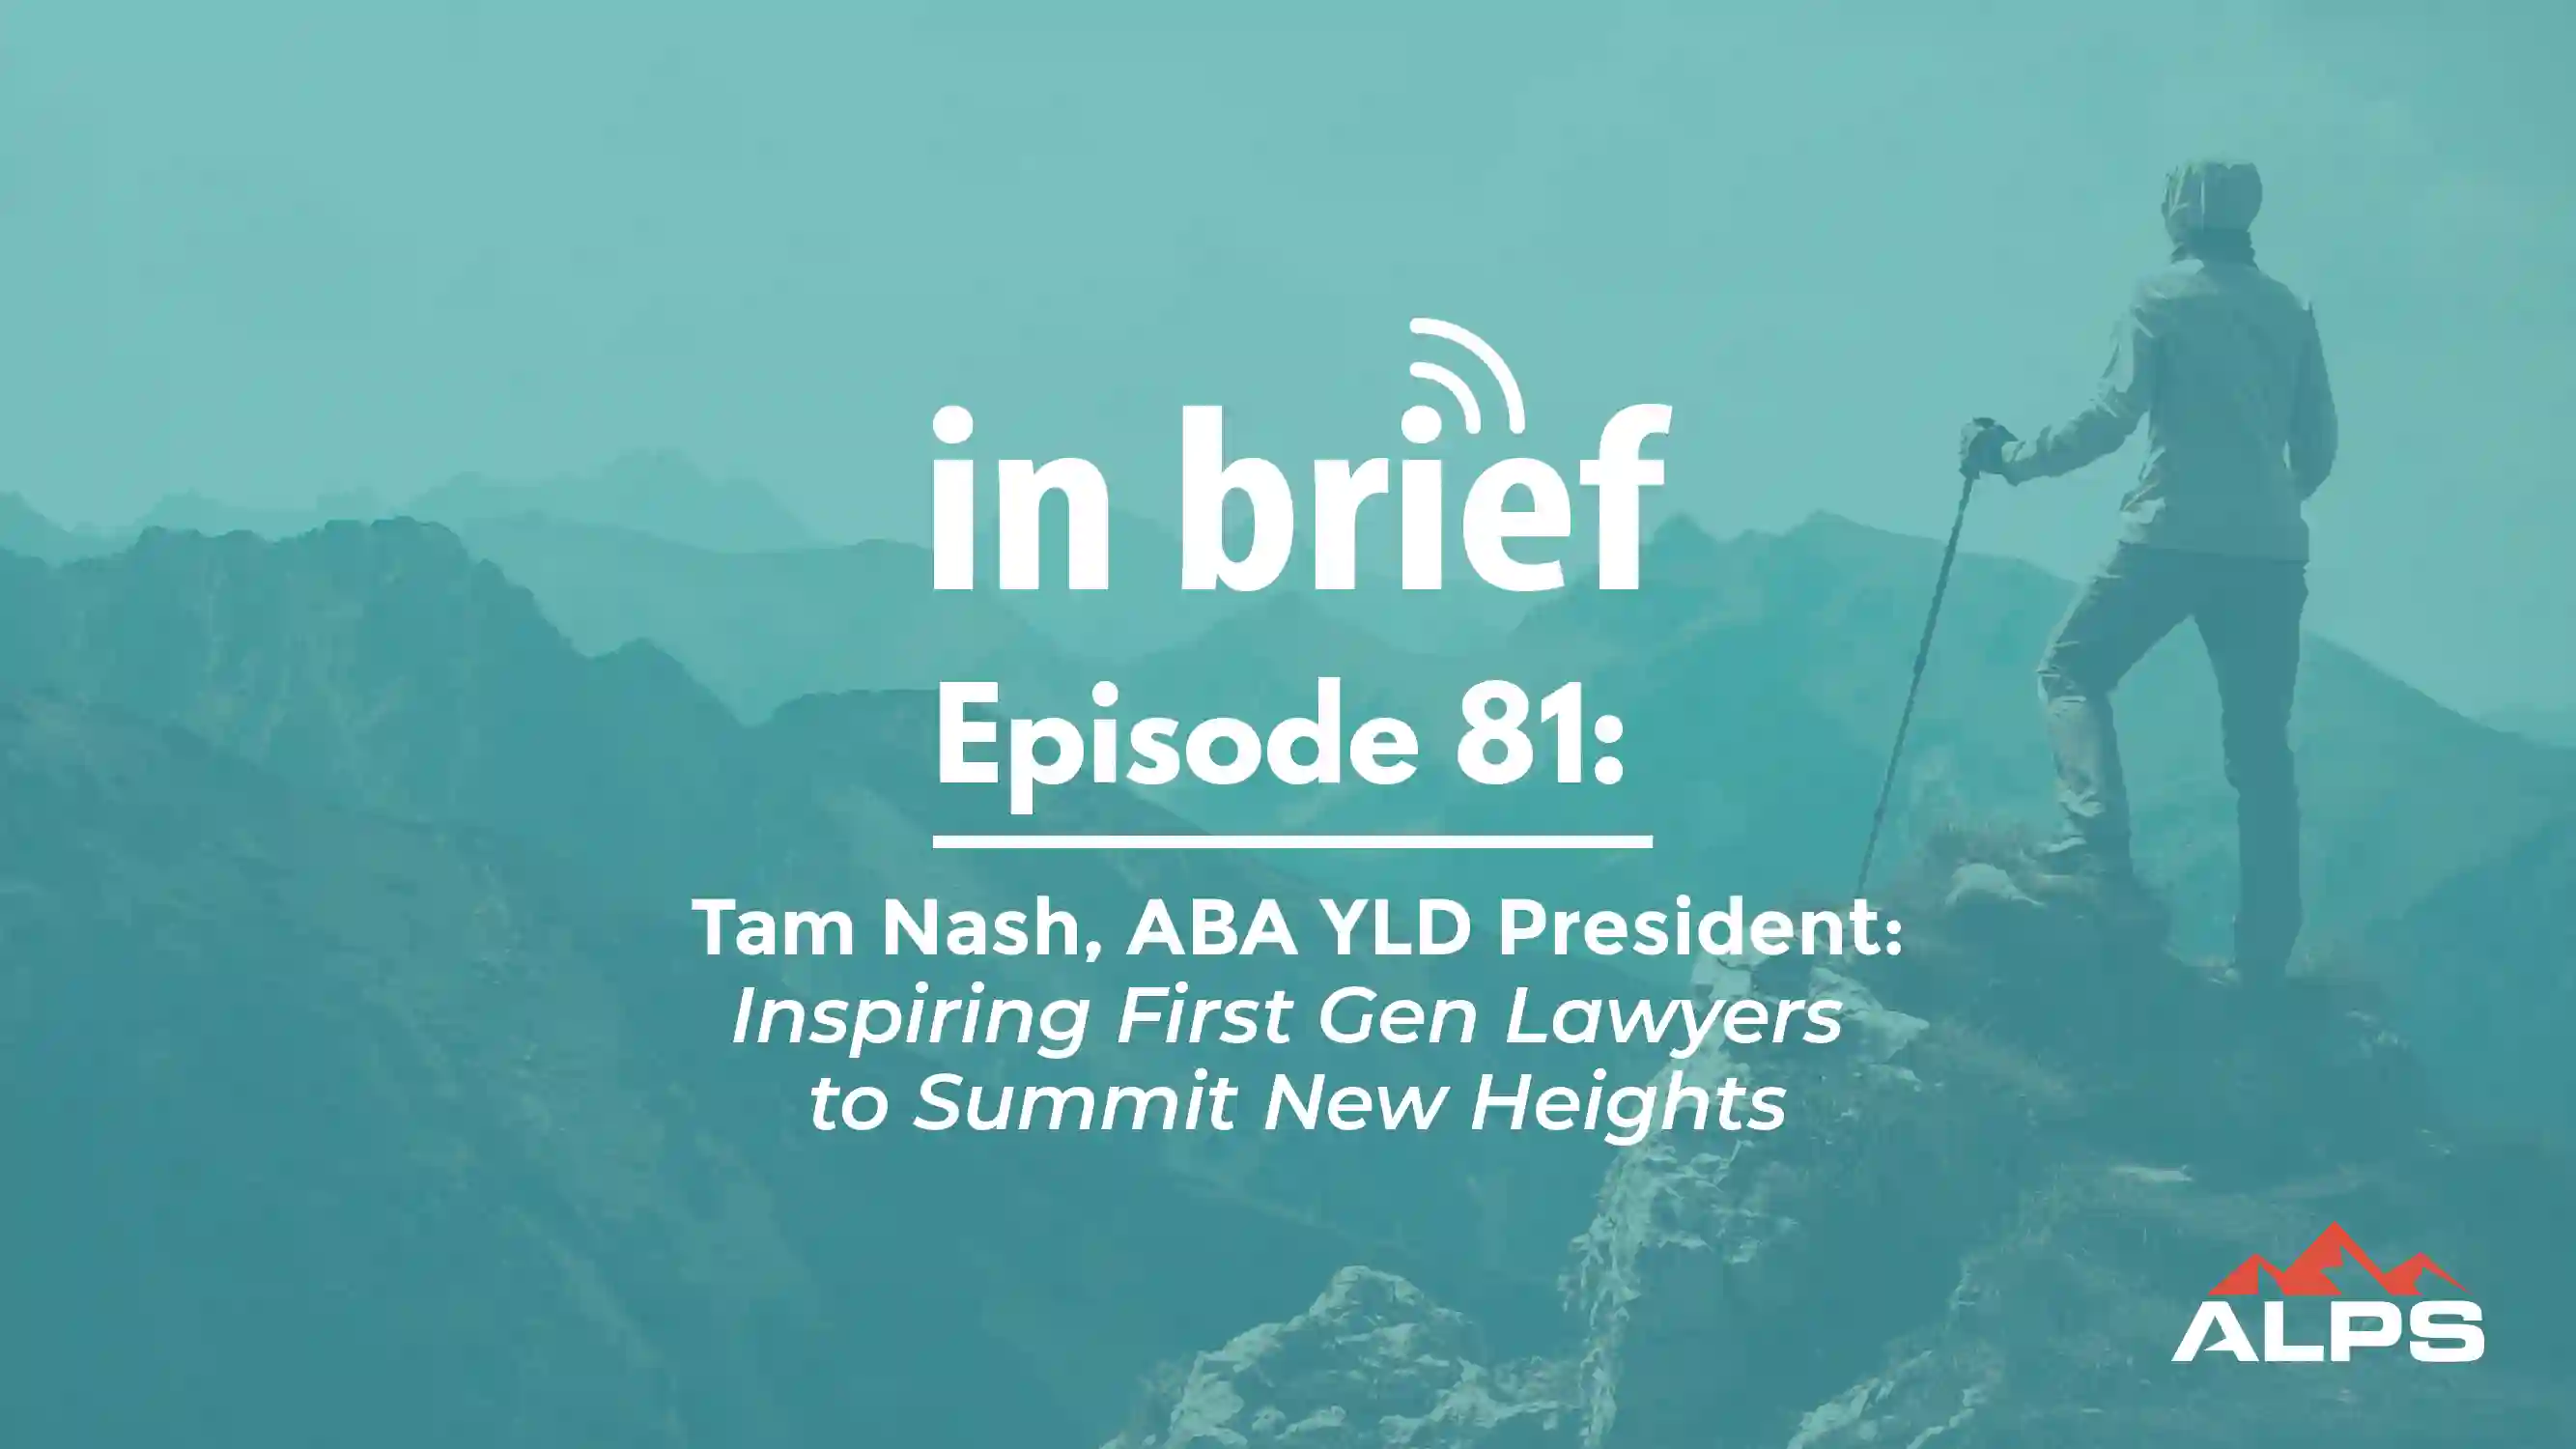 Tam Nash, ABA YLD President - Inspiring First Gen Lawyers to Summit New Heights